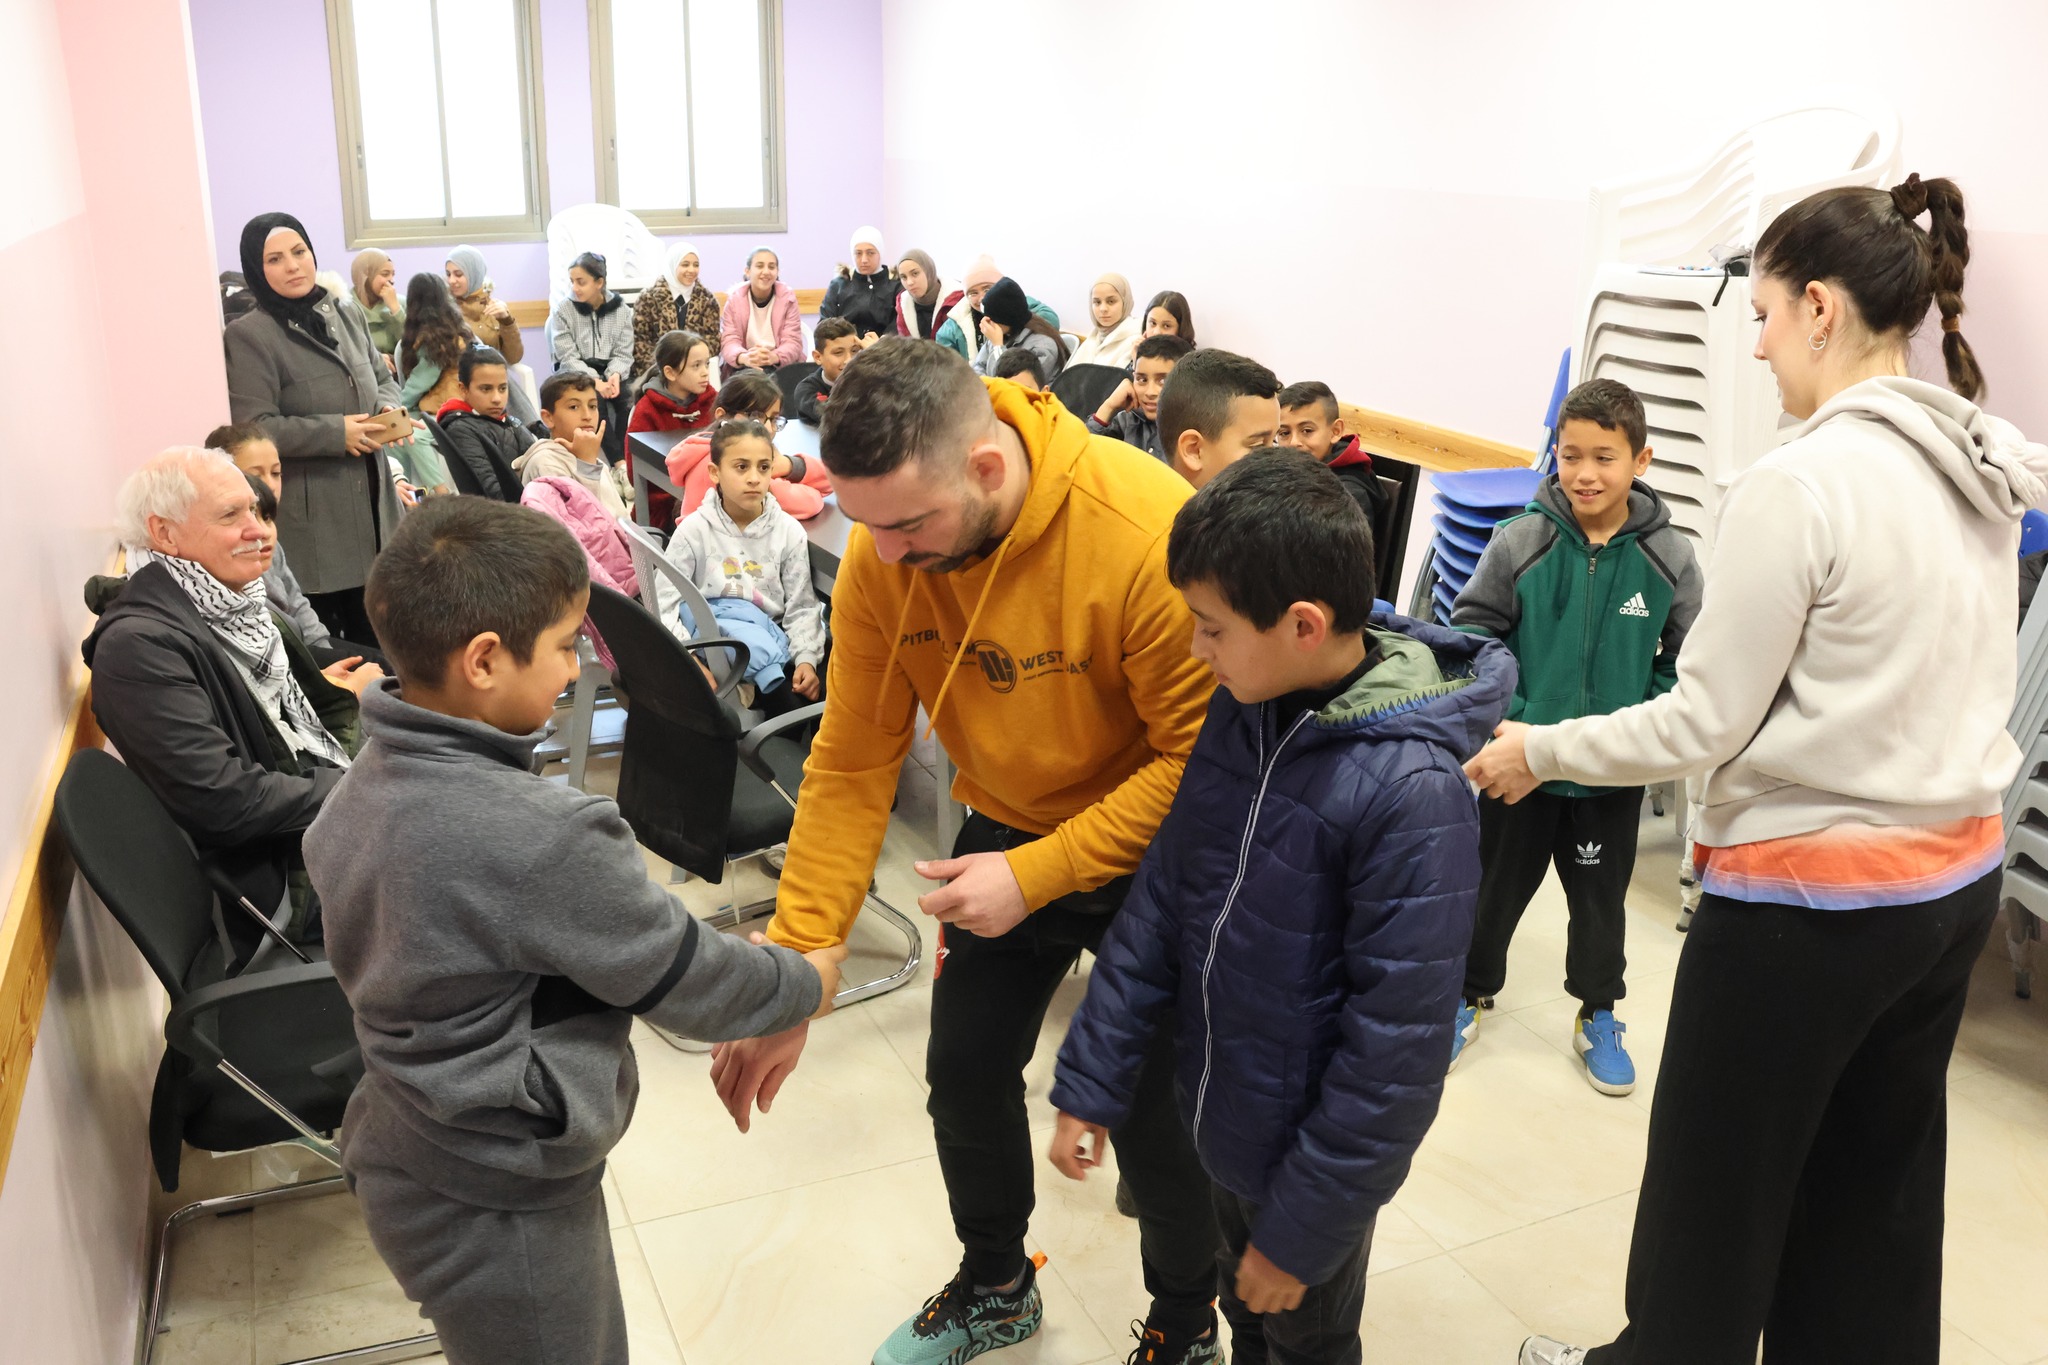 We went to Refugee camp to teach kids some self defense